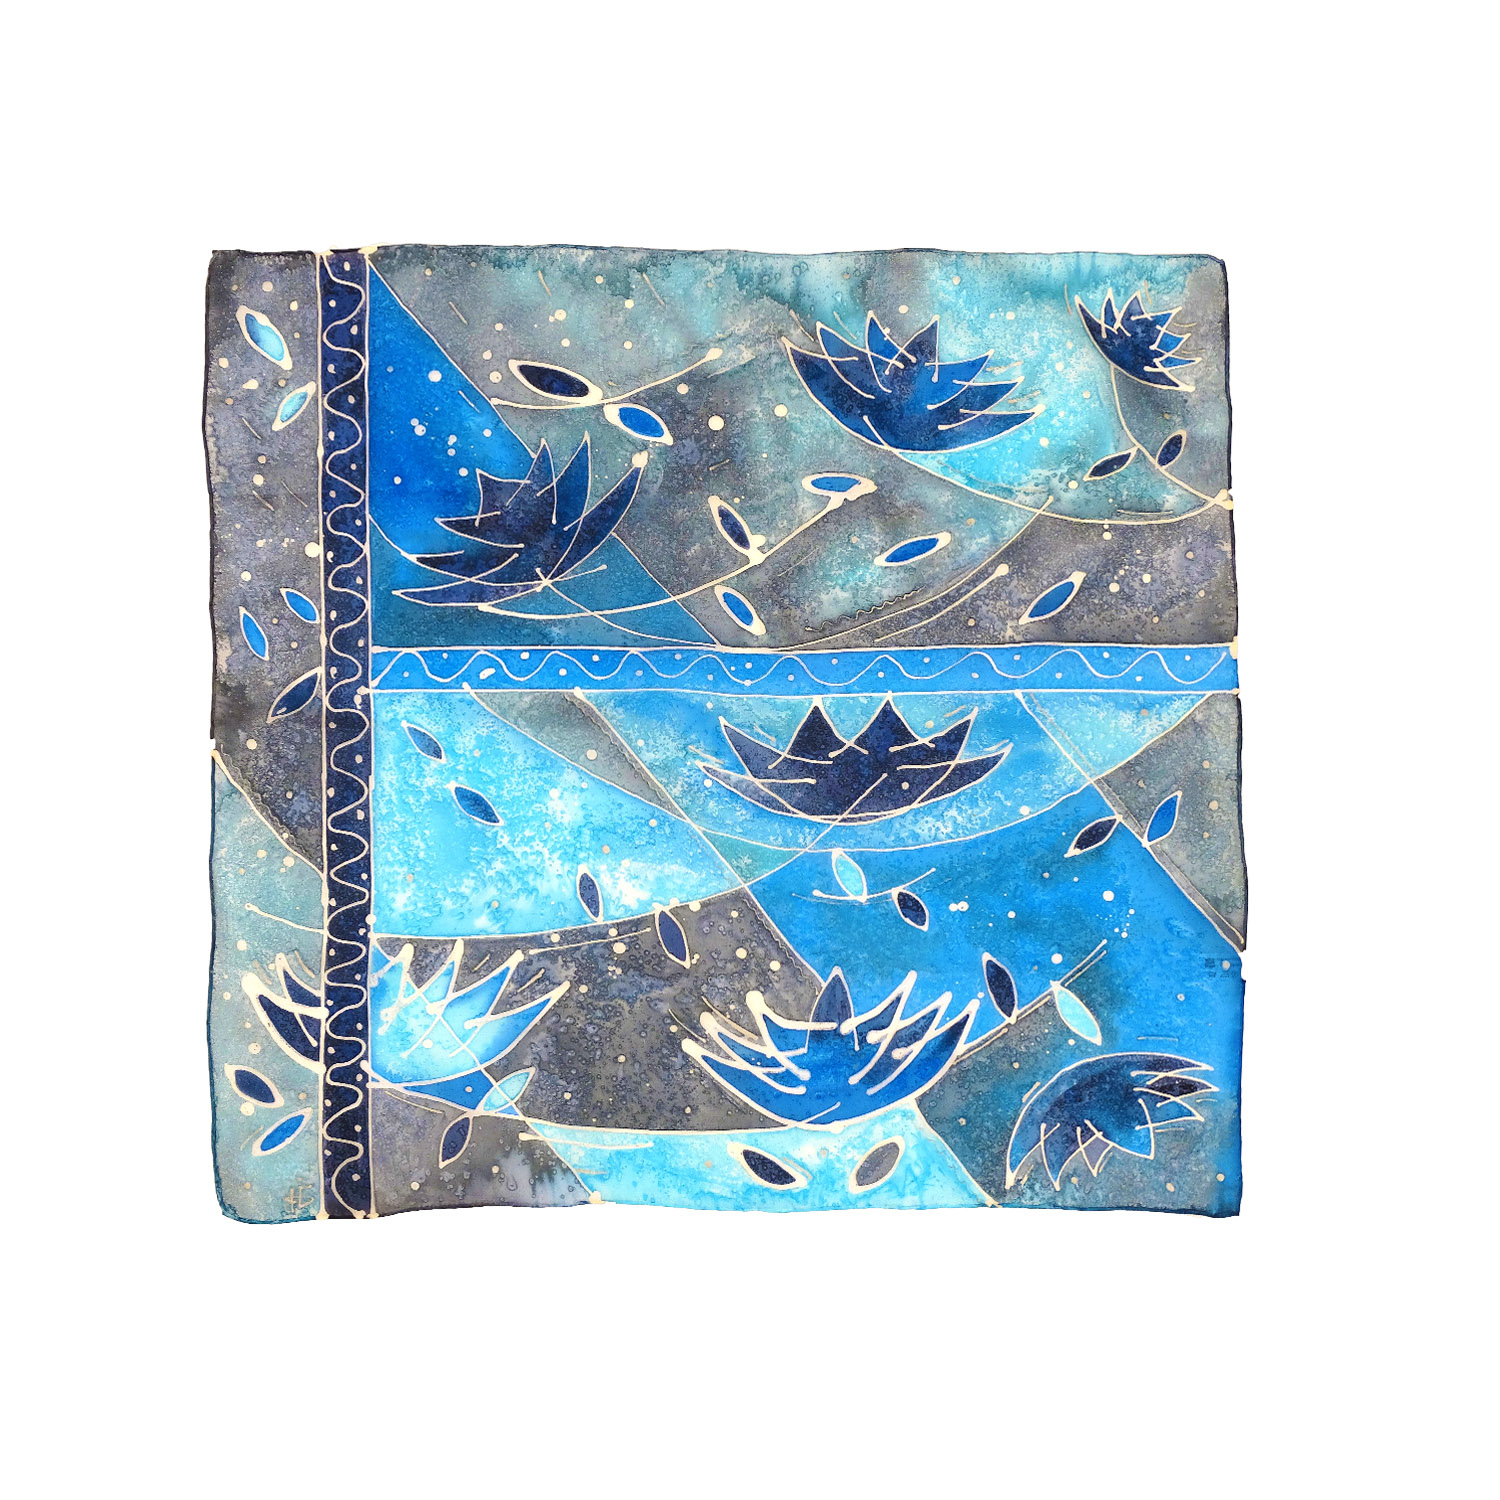 Hand painted headscarf - Moments of the blue